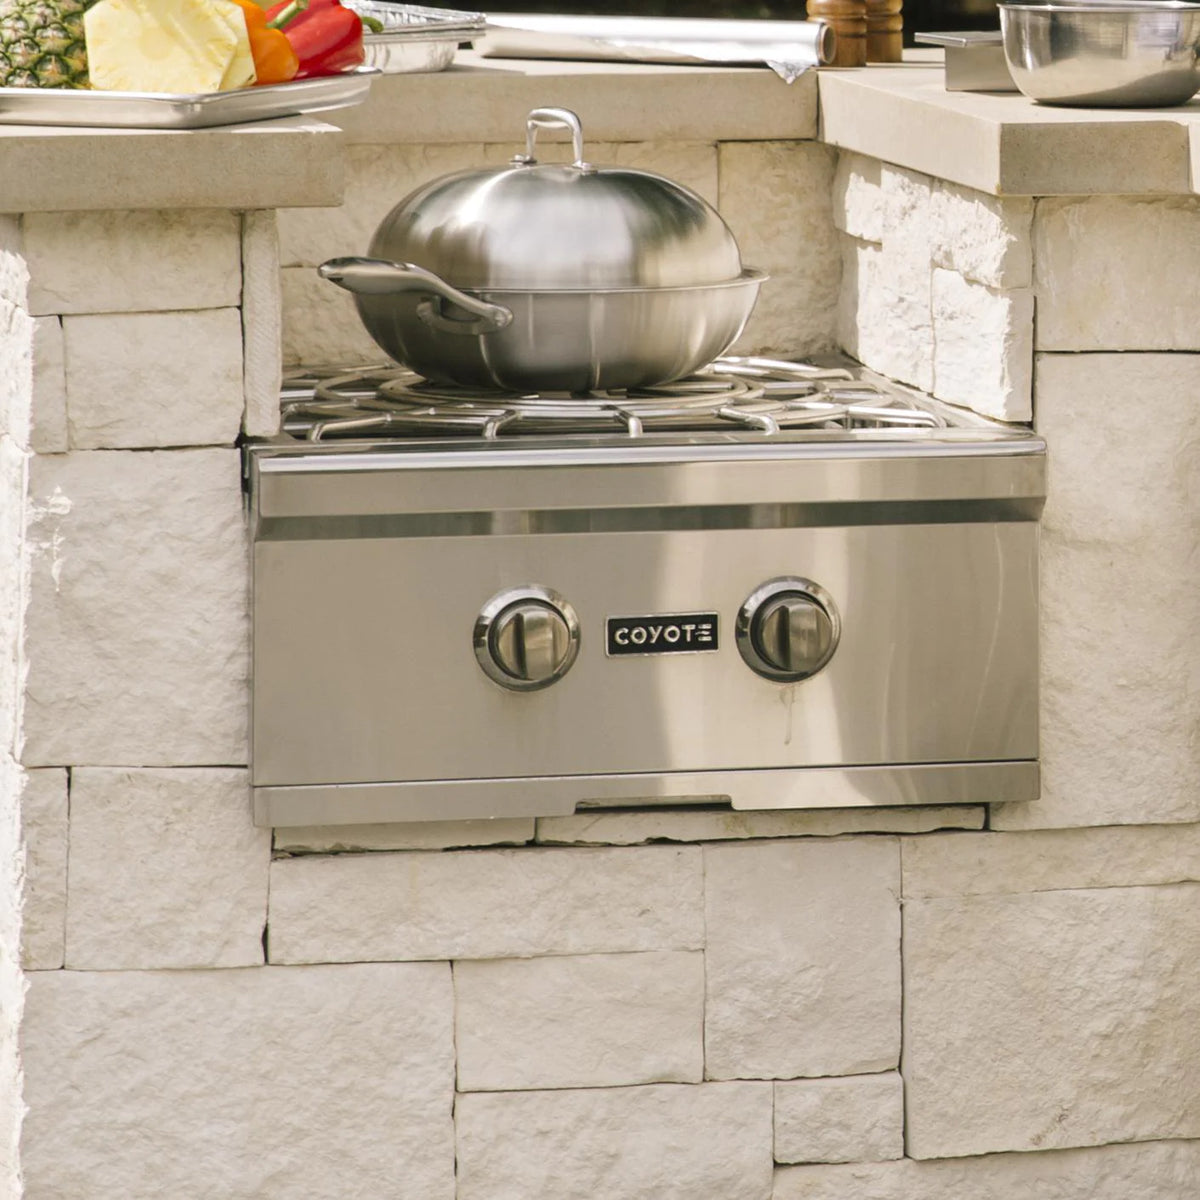 Coyote Built-In Propane Gas Power Burner Installed in Outdoor Kitchen (Shown with Wok - Not Included)